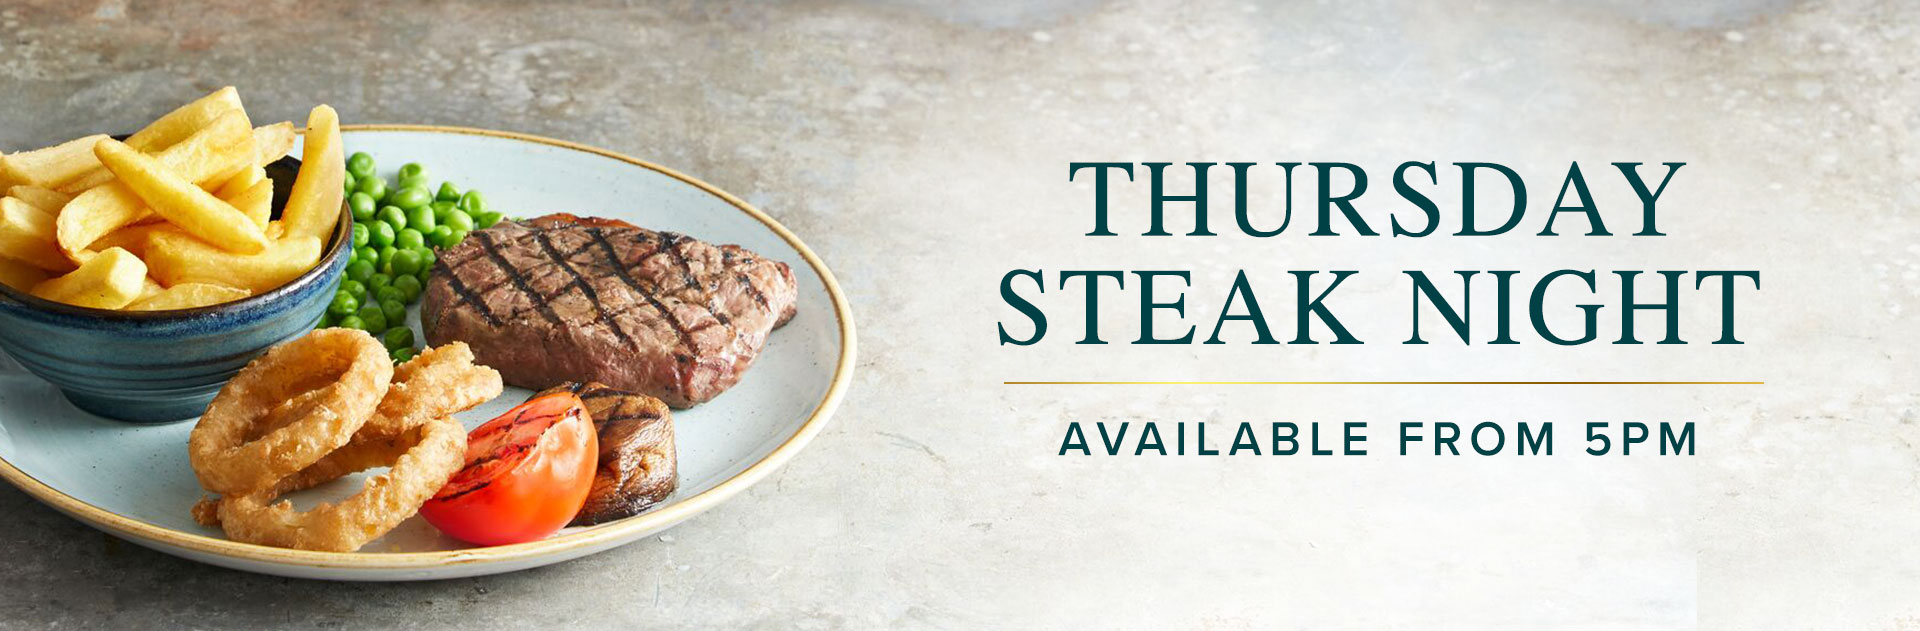 Thursday Steak Night at The Punch Bowl